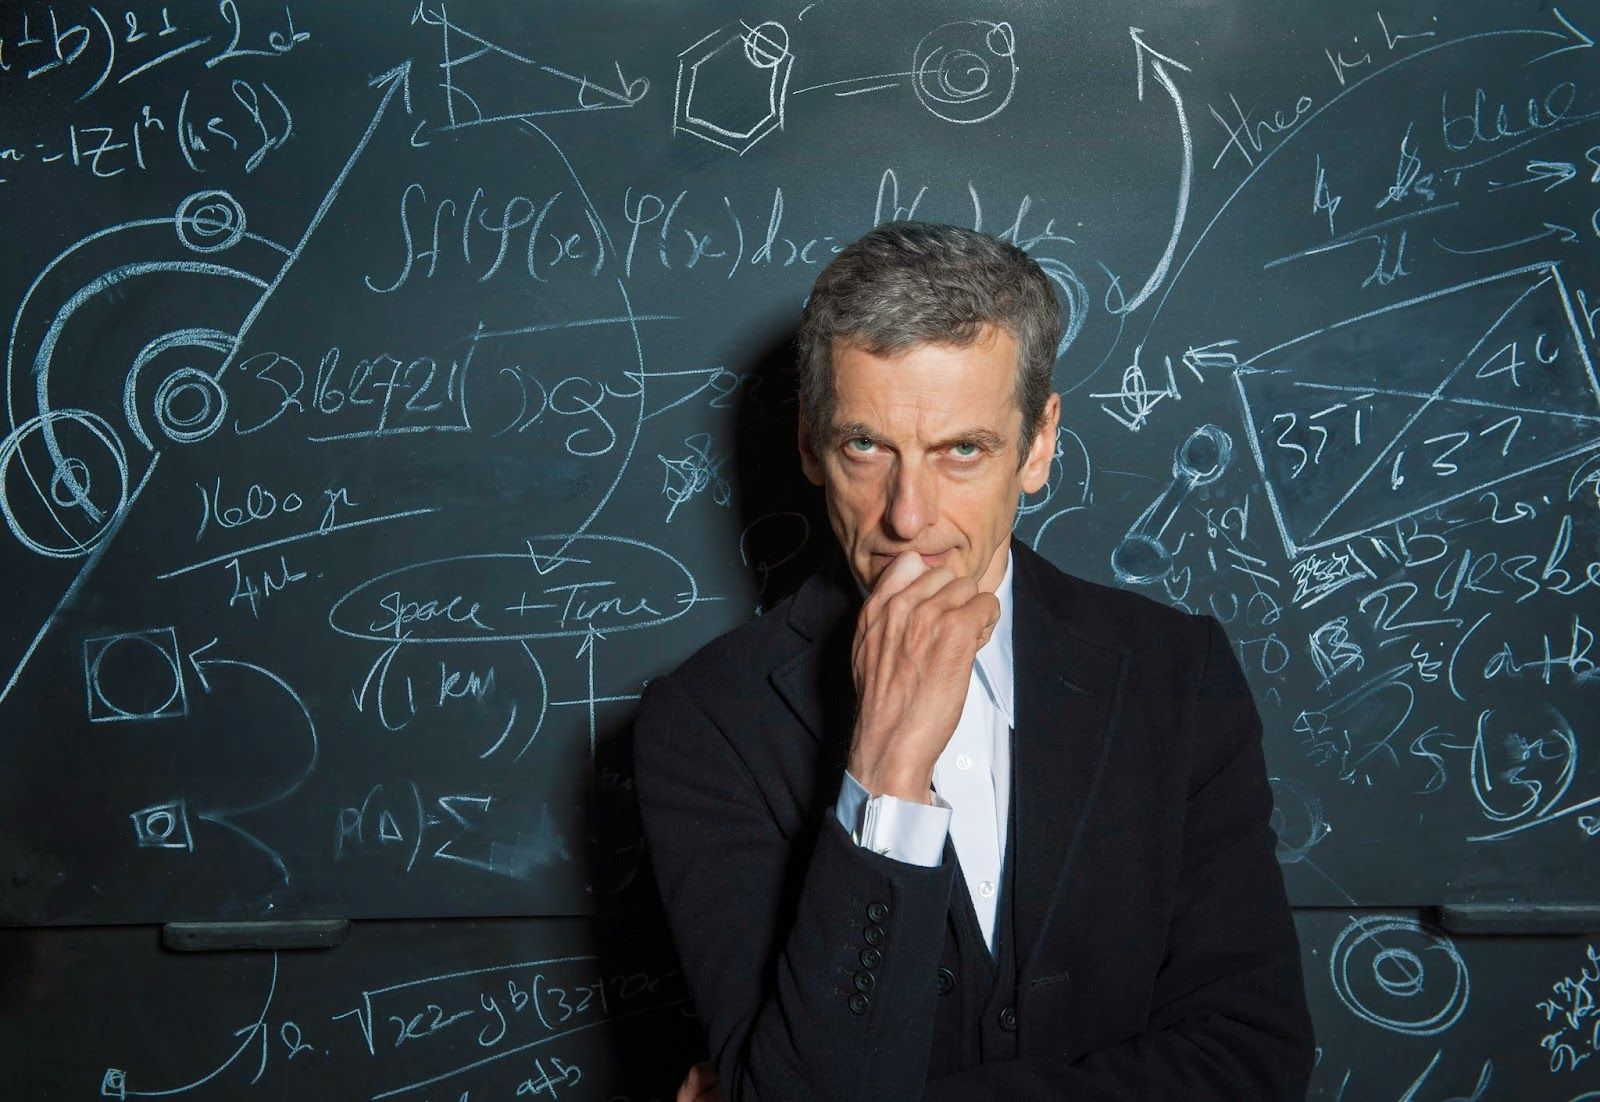 Three responses to New Doctor Who's 10th anniversary